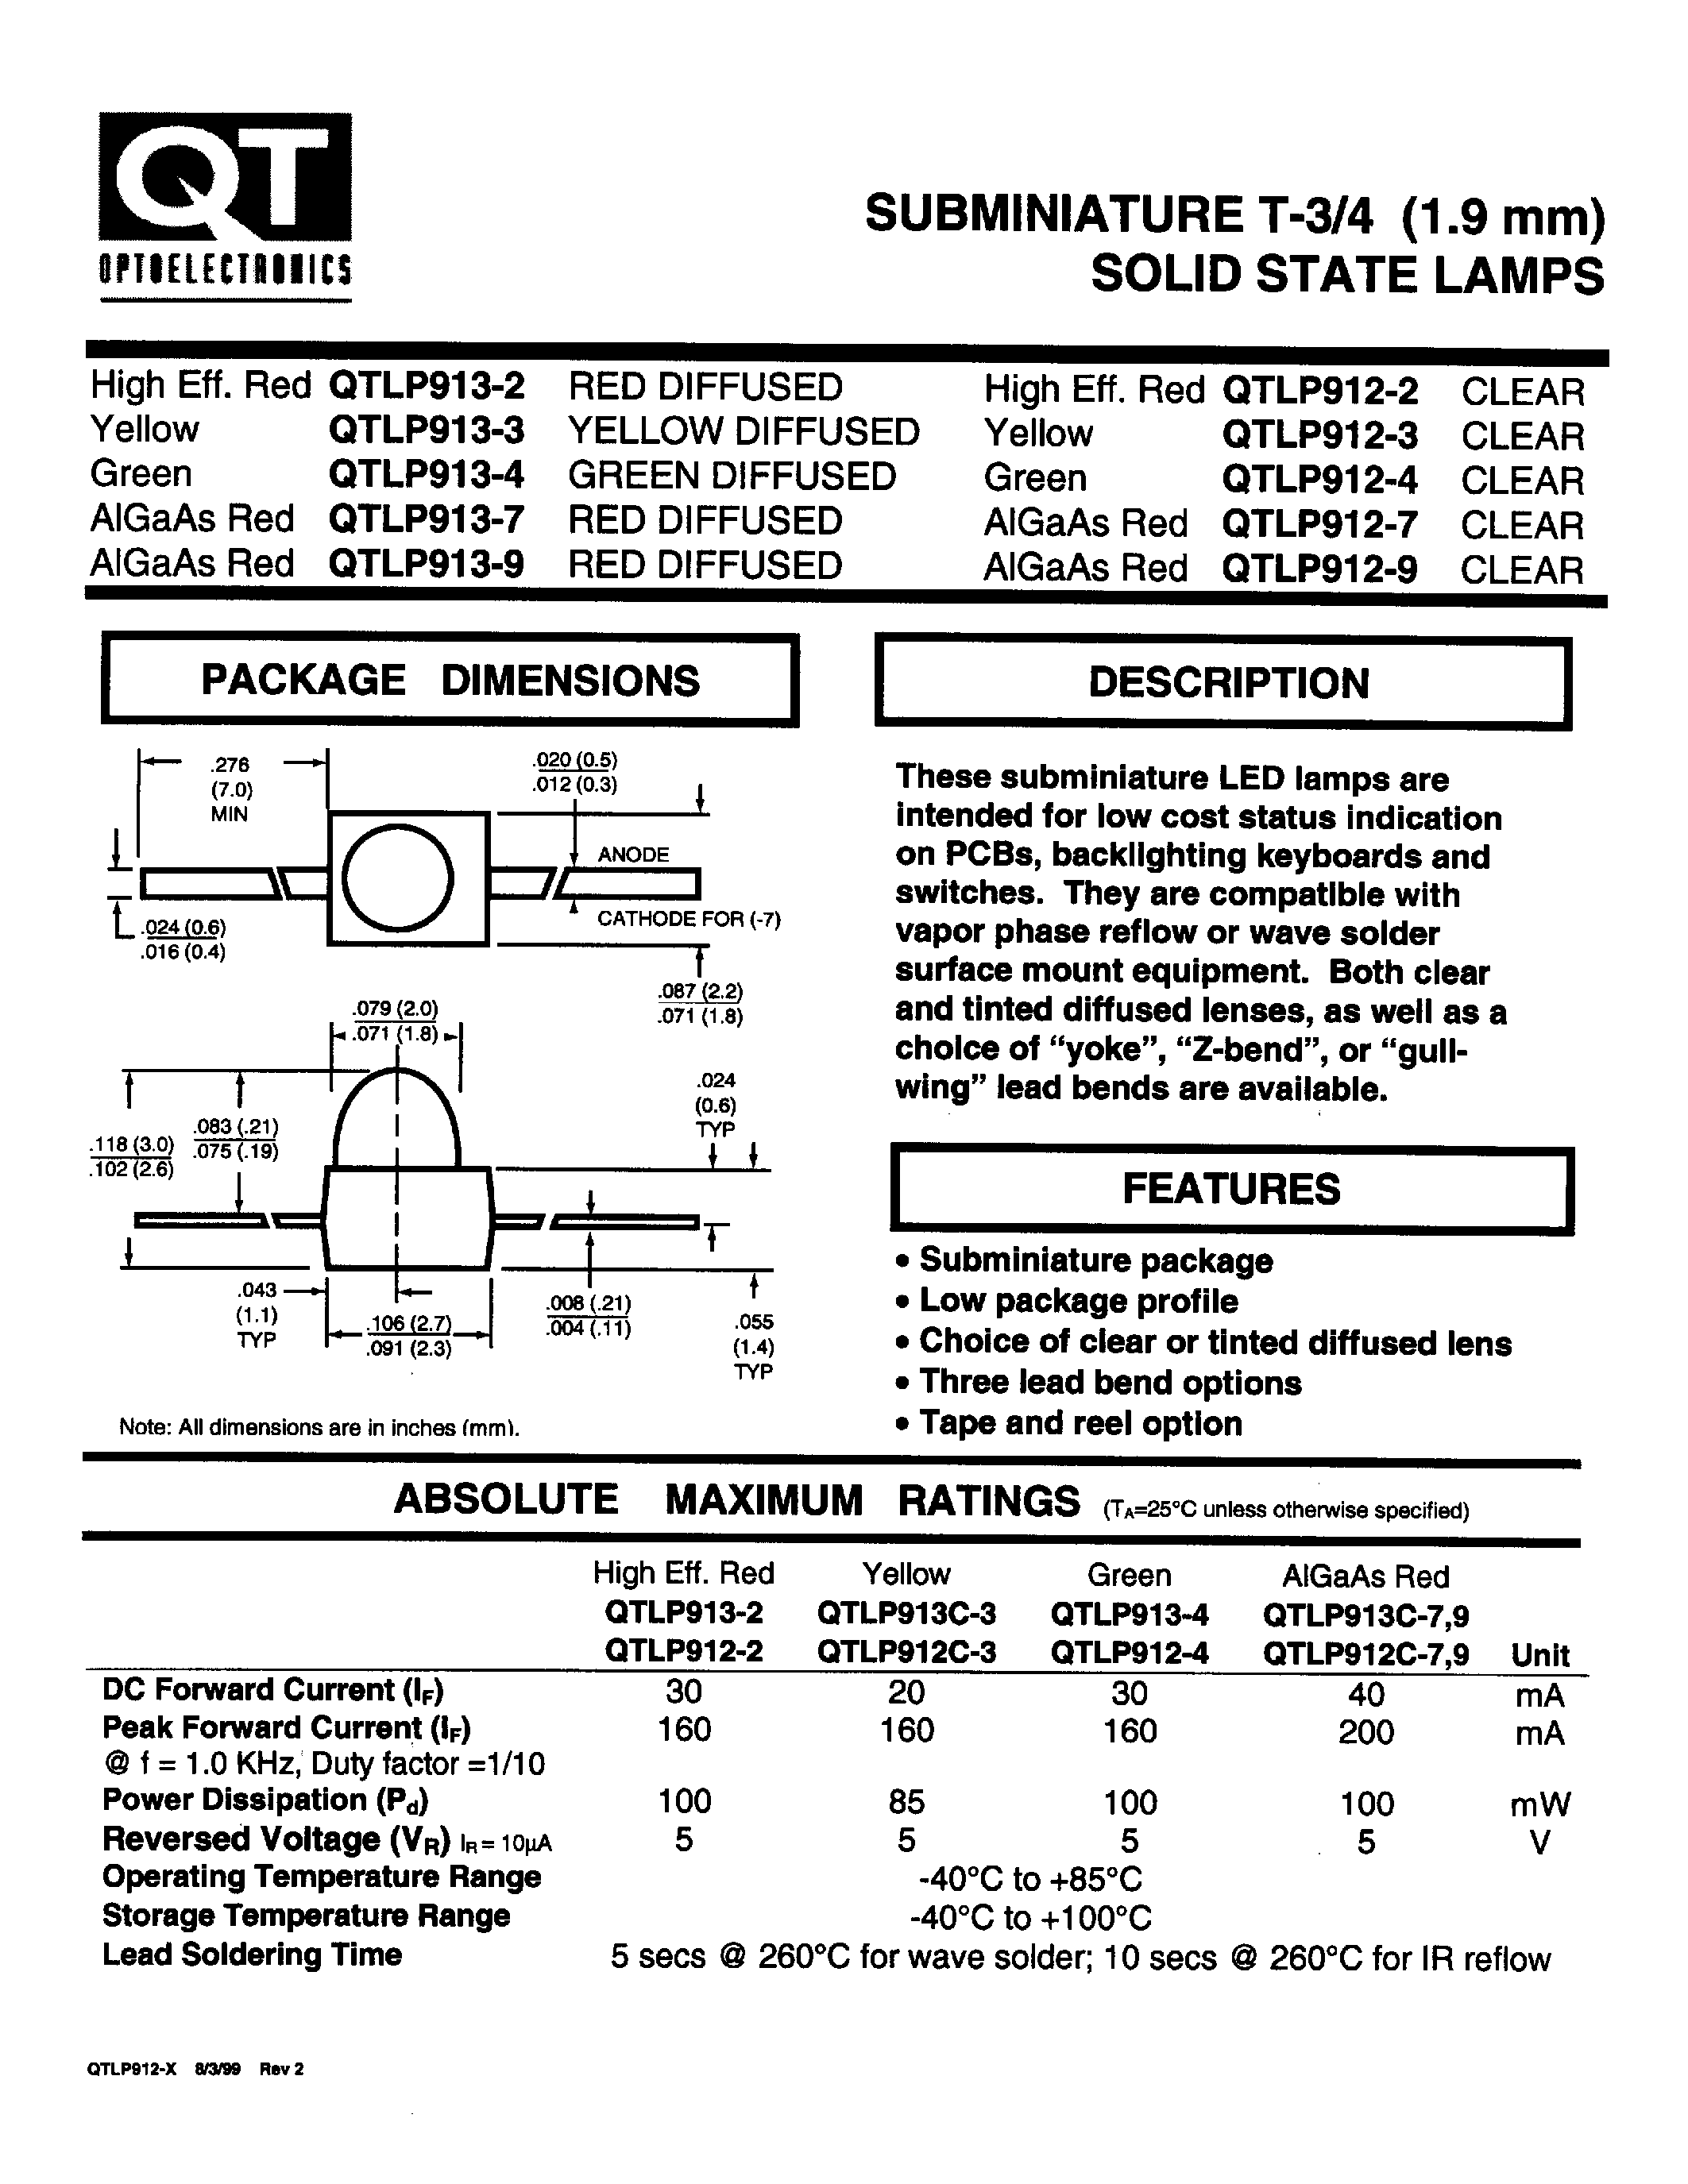 Даташит QTLP912-4-SUBMINIATURE T-3/4 (1.9 mm) SOLID STATE LAMPS страница 1